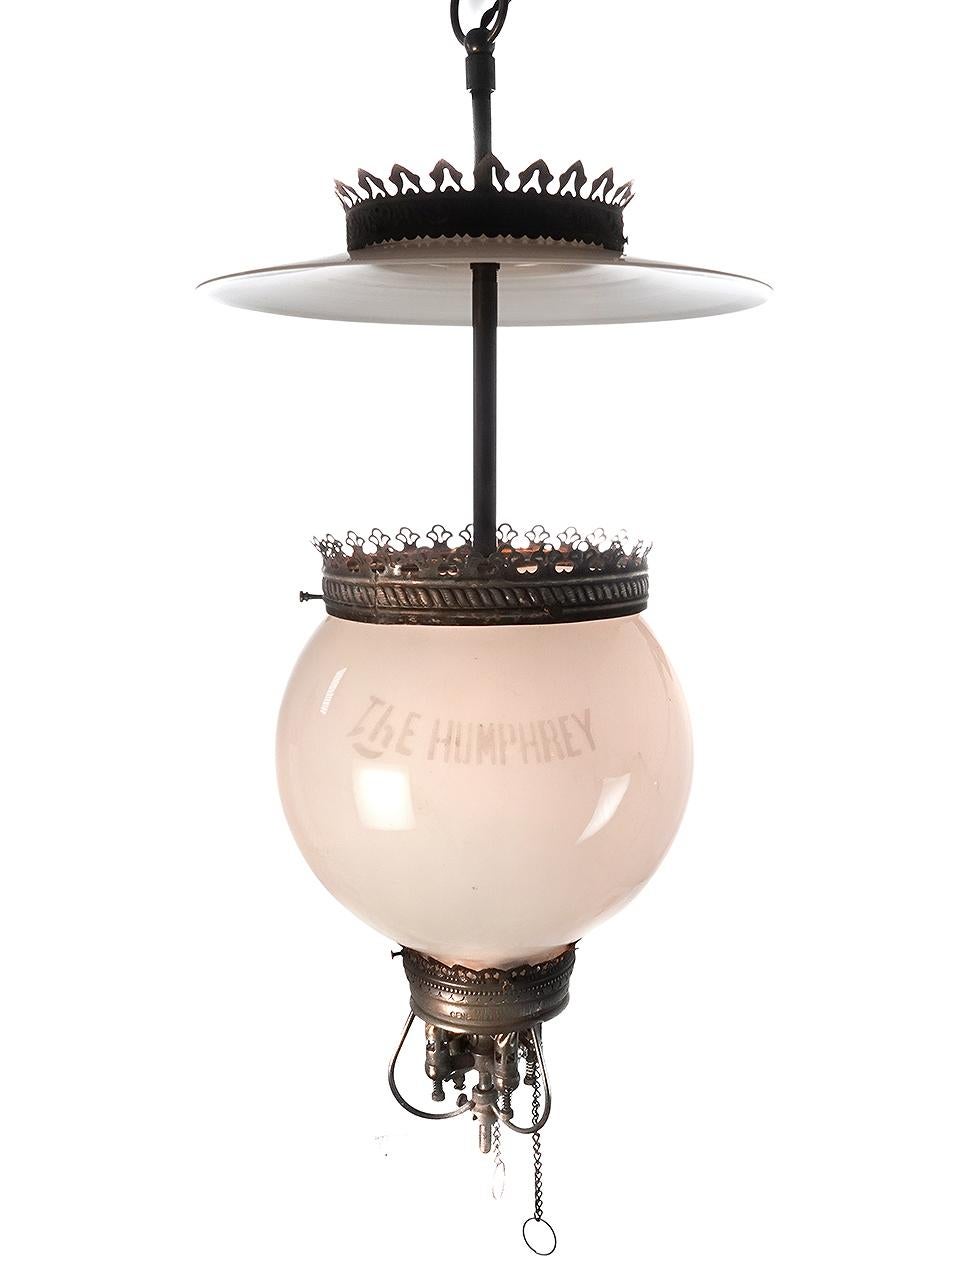 American Signed Humphrey Gas Lamp, Electrified